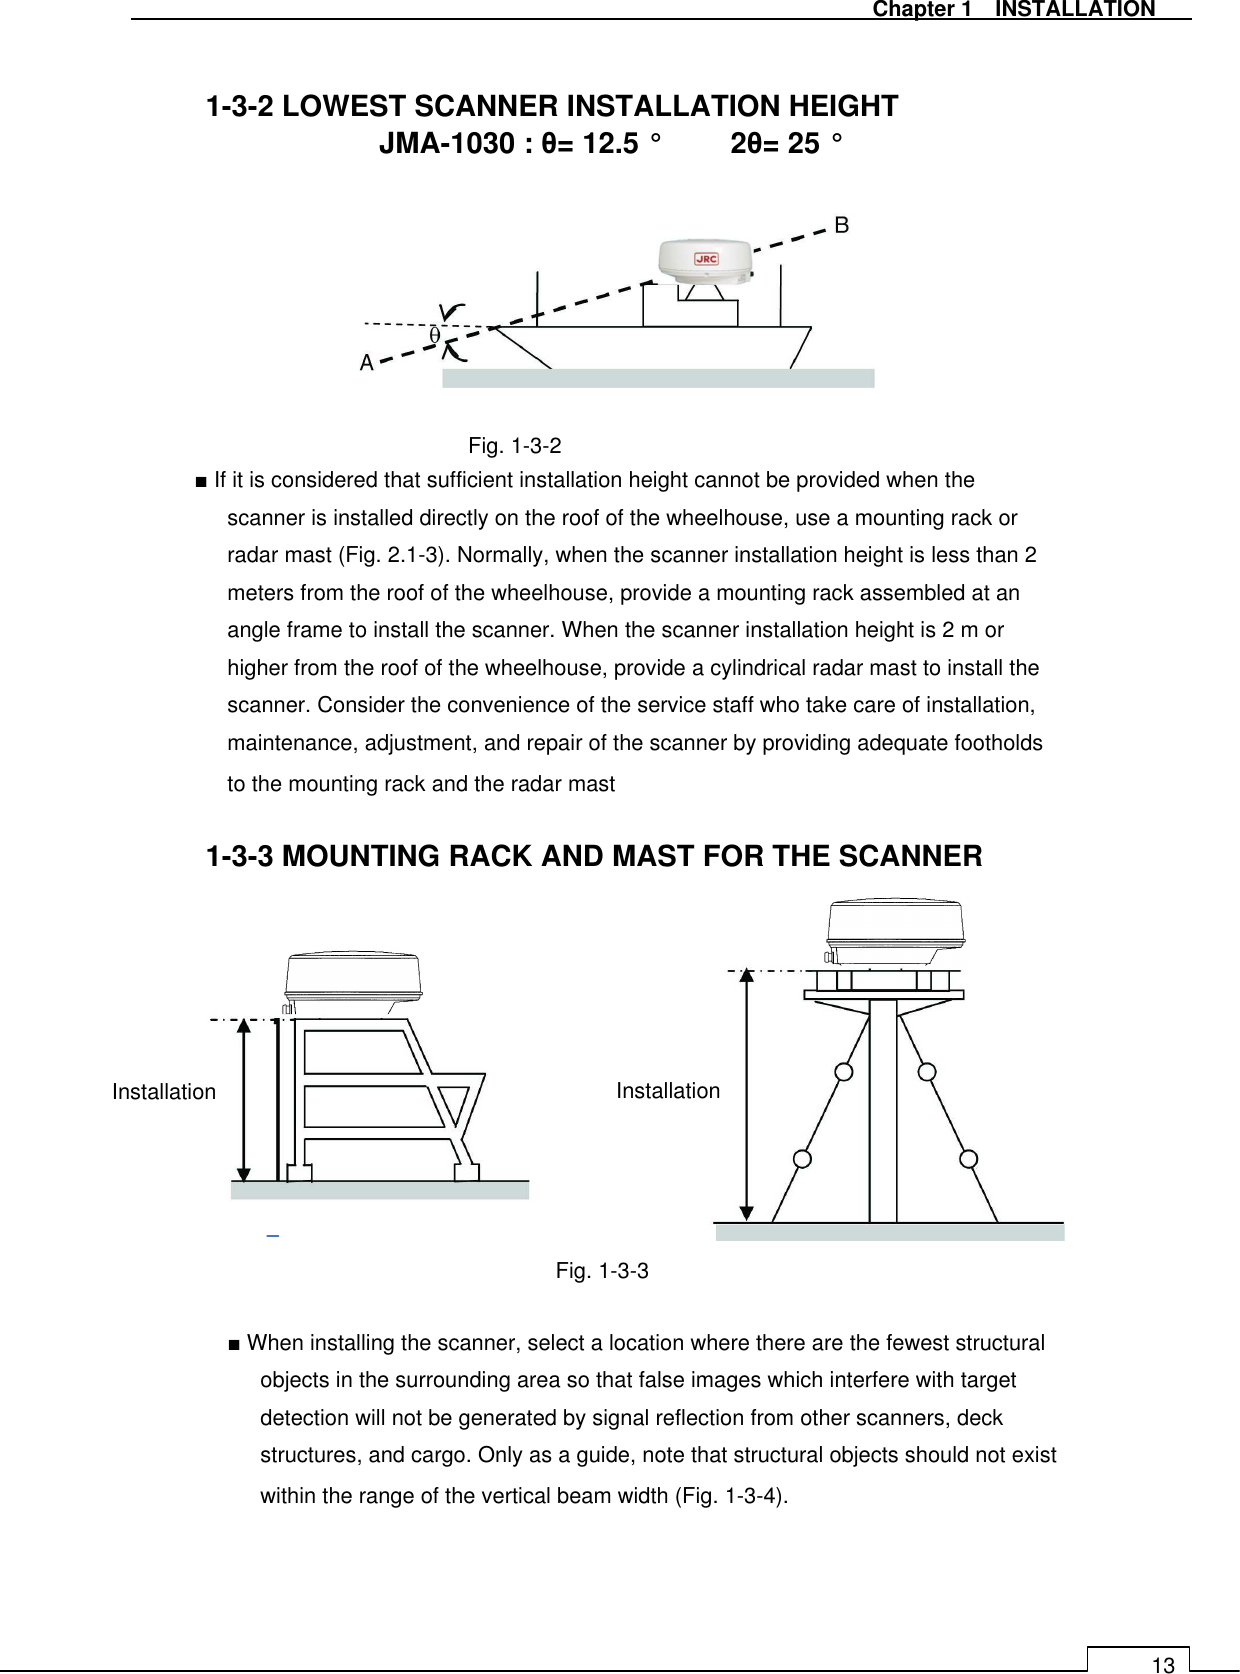   Chapter 1    INSTALLATION 13  1-3-2 LOWEST SCANNER INSTALLATION HEIGHT JMA-1030 : θ= 12.5 °  2θ= 25 °            Fig. 1-3-2 ■ If it is considered that sufficient installation height cannot be provided when the scanner is installed directly on the roof of the wheelhouse, use a mounting rack or radar mast (Fig. 2.1-3). Normally, when the scanner installation height is less than 2 meters from the roof of the wheelhouse, provide a mounting rack assembled at an angle frame to install the scanner. When the scanner installation height is 2 m or higher from the roof of the wheelhouse, provide a cylindrical radar mast to install the scanner. Consider the convenience of the service staff who take care of installation, maintenance, adjustment, and repair of the scanner by providing adequate footholds to the mounting rack and the radar mast  1-3-3 MOUNTING RACK AND MAST FOR THE SCANNER           Fig. 1-3-3  ■ When installing the scanner, select a location where there are the fewest structural objects in the surrounding area so that false images which interfere with target detection will not be generated by signal reflection from other scanners, deck structures, and cargo. Only as a guide, note that structural objects should not exist within the range of the vertical beam width (Fig. 1-3-4).      Installation  Installation 